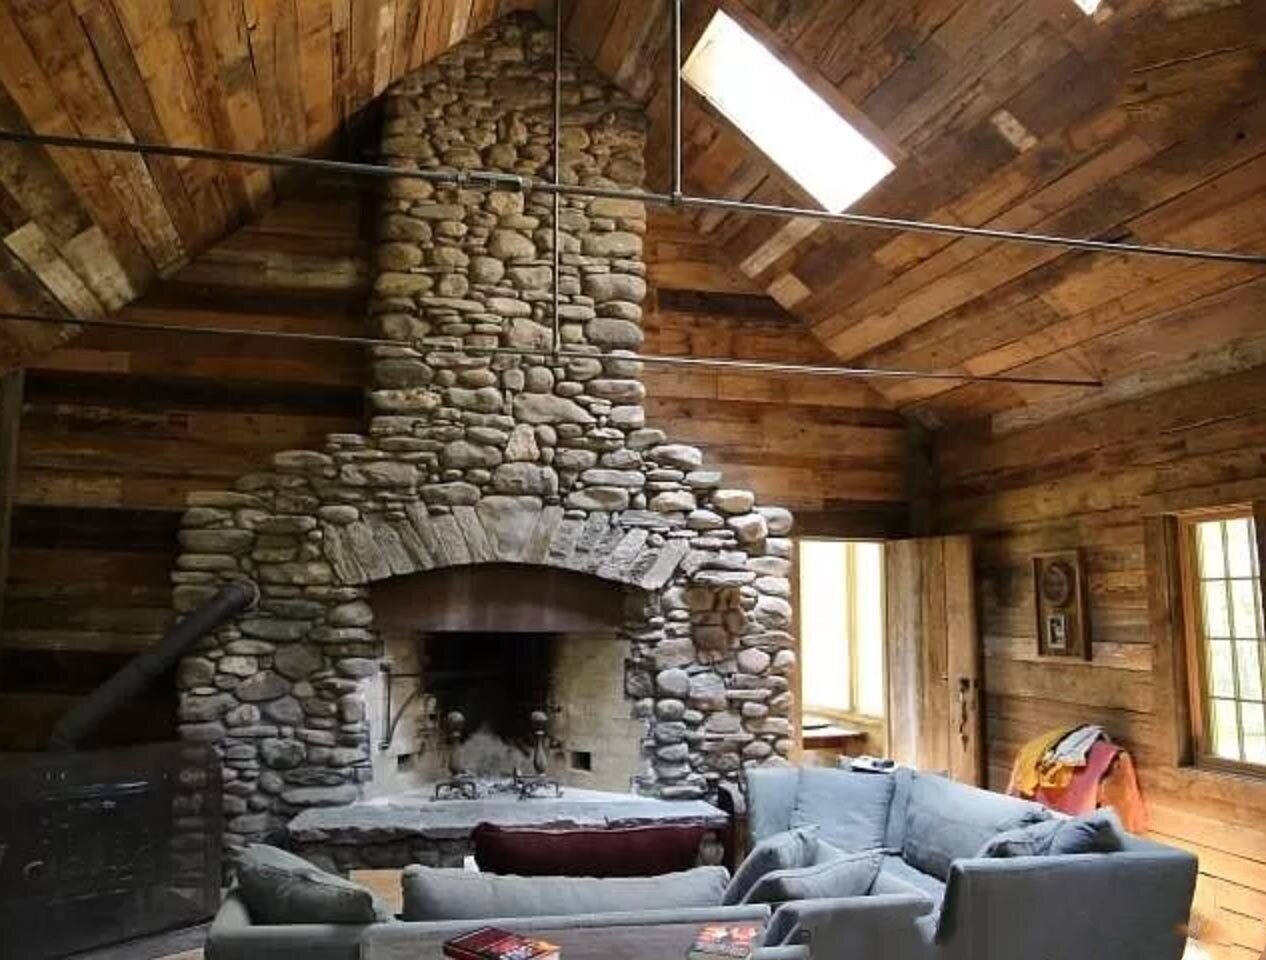 Interior of a building at Jenny Brook, with a large handmade stone fireplace and seating area underneath a vaulted ceiling.